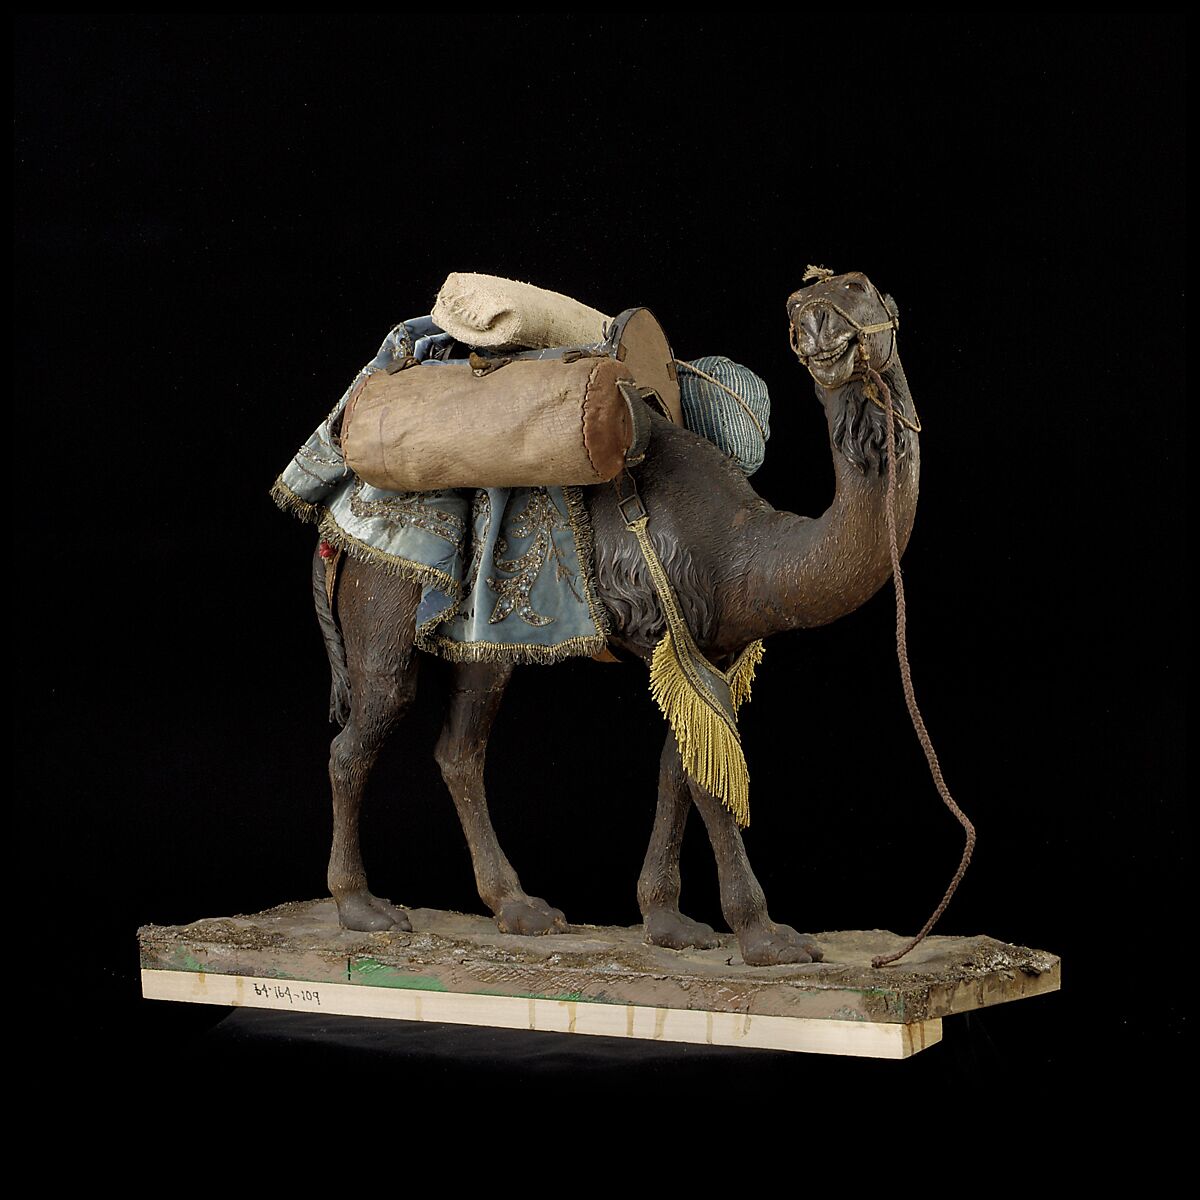 Camel, Polychromed wooden body covered with stucco; wooden saddle and leather girth straps; burlap cushion and leather saddlebags